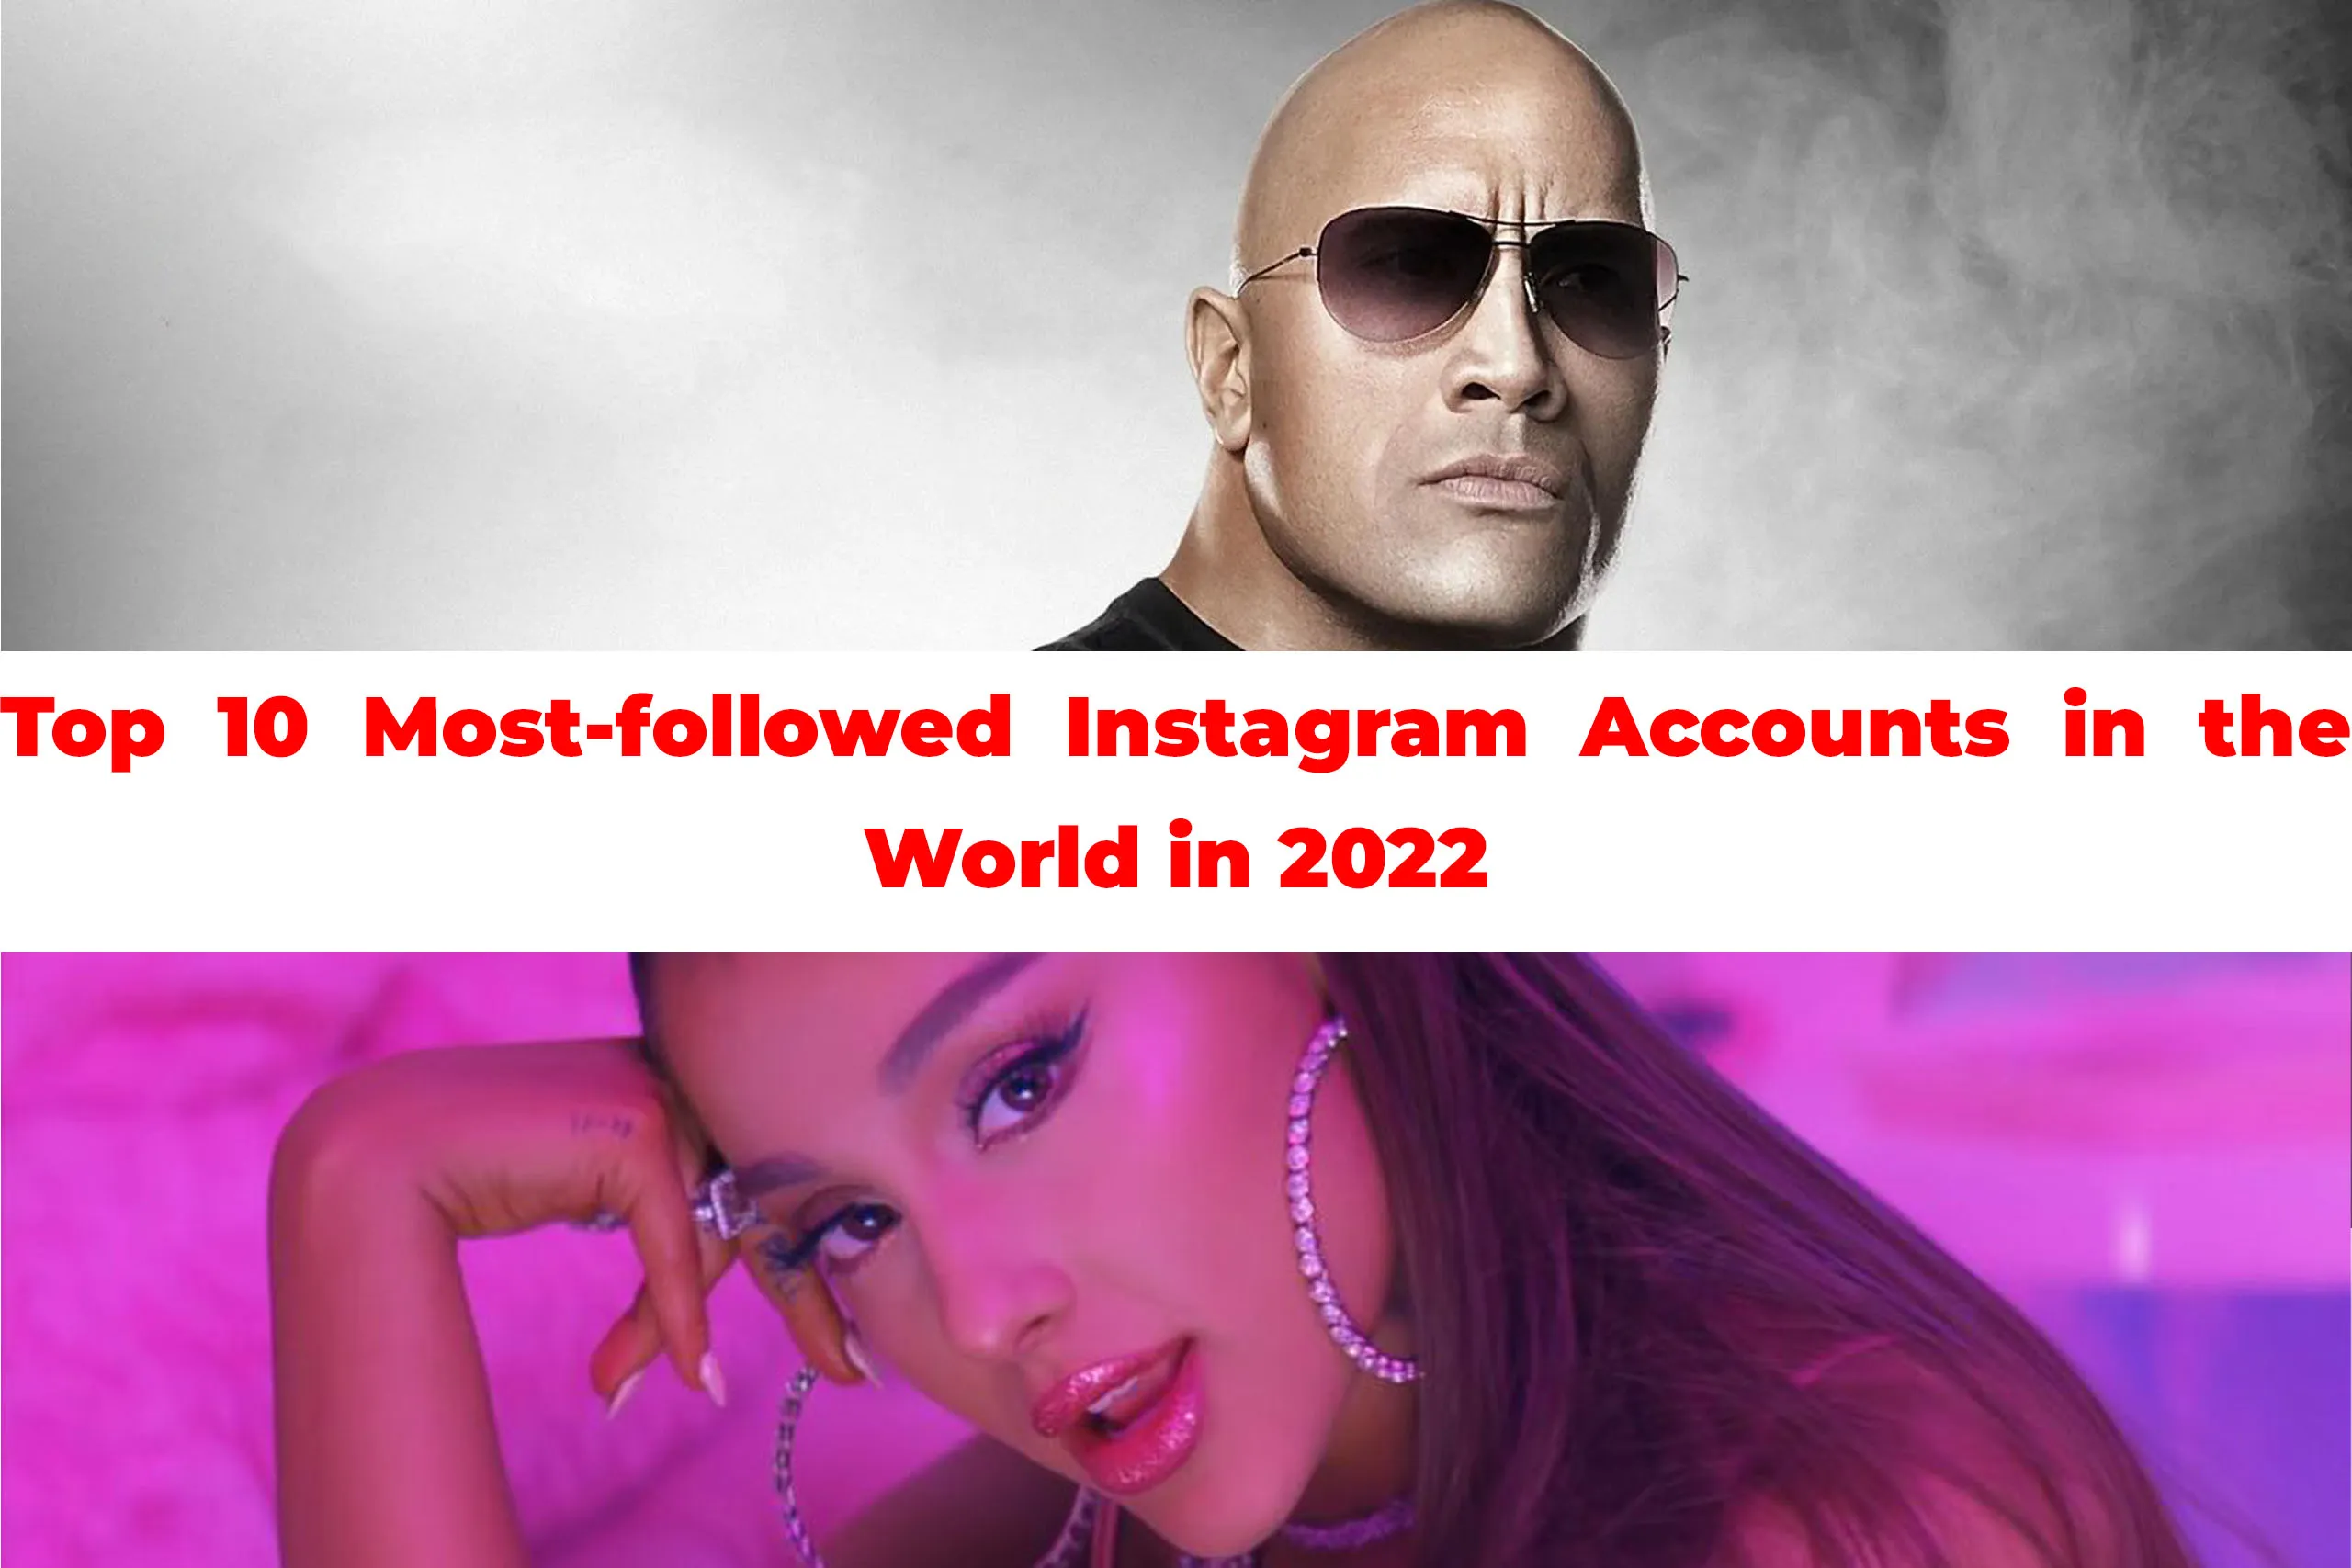 Top 10 Most-Followed Instagram Accounts in the World.